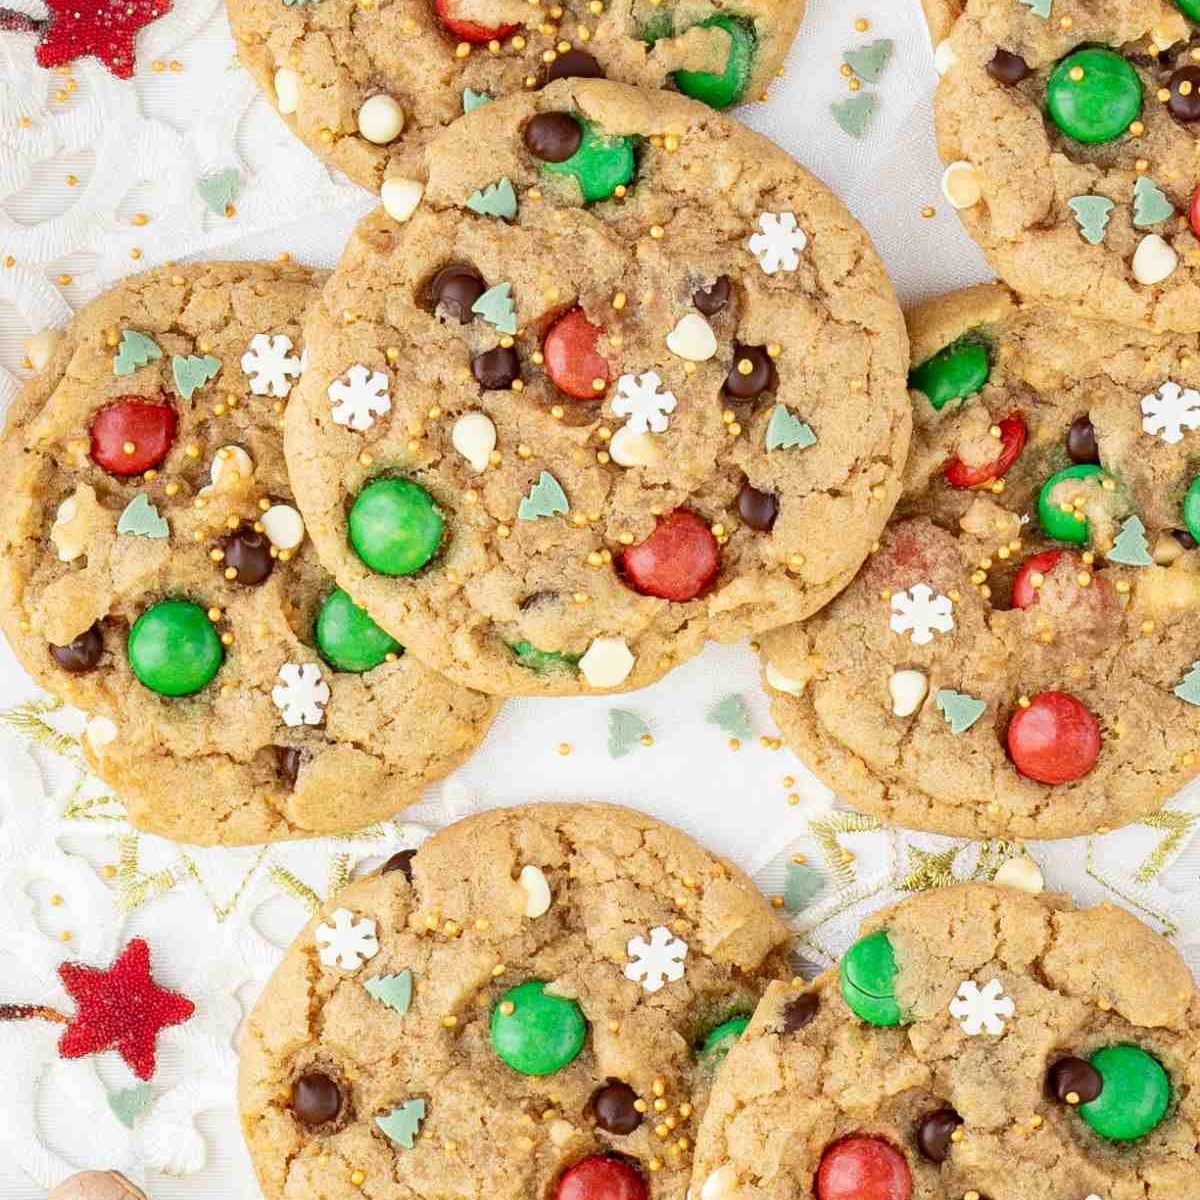 Chocolate chip cookies with green and red candies.